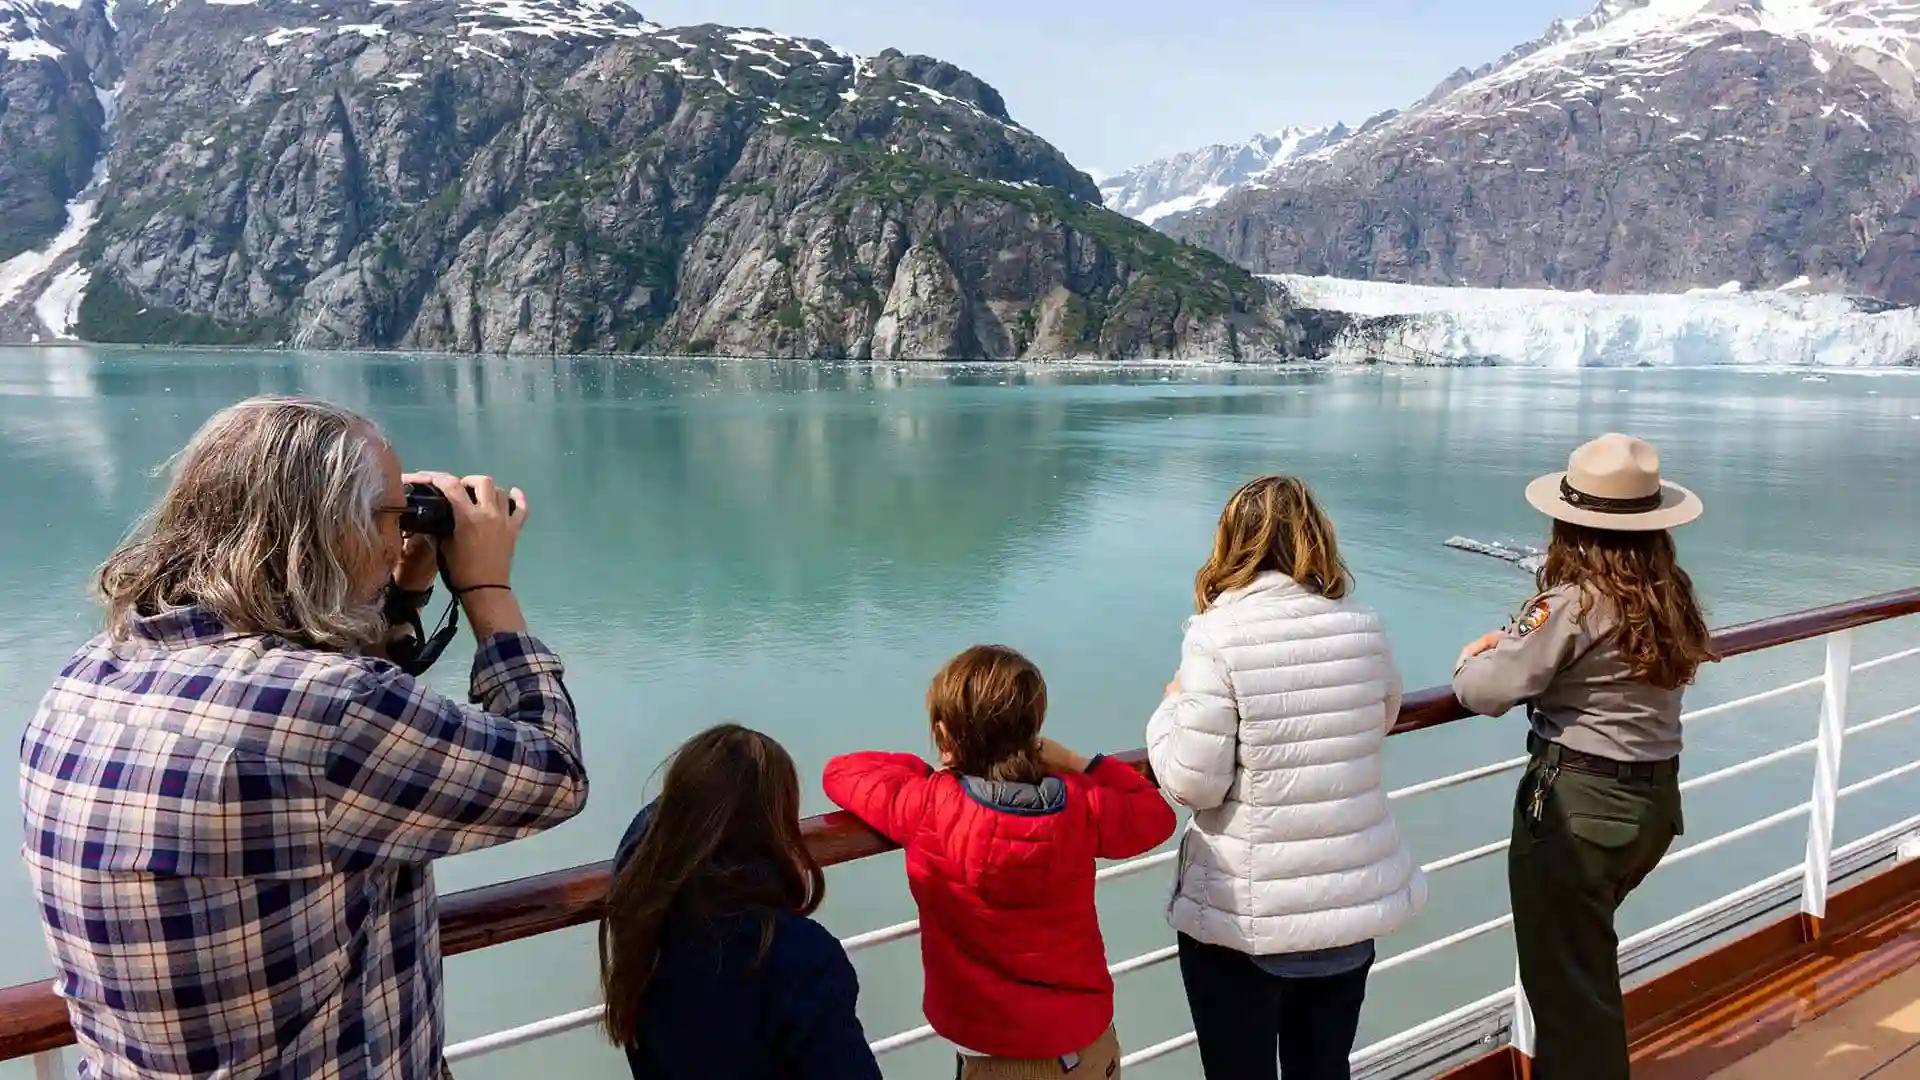 Travel expert Samantha Brown viewing glaciers with family and National Park ranger.